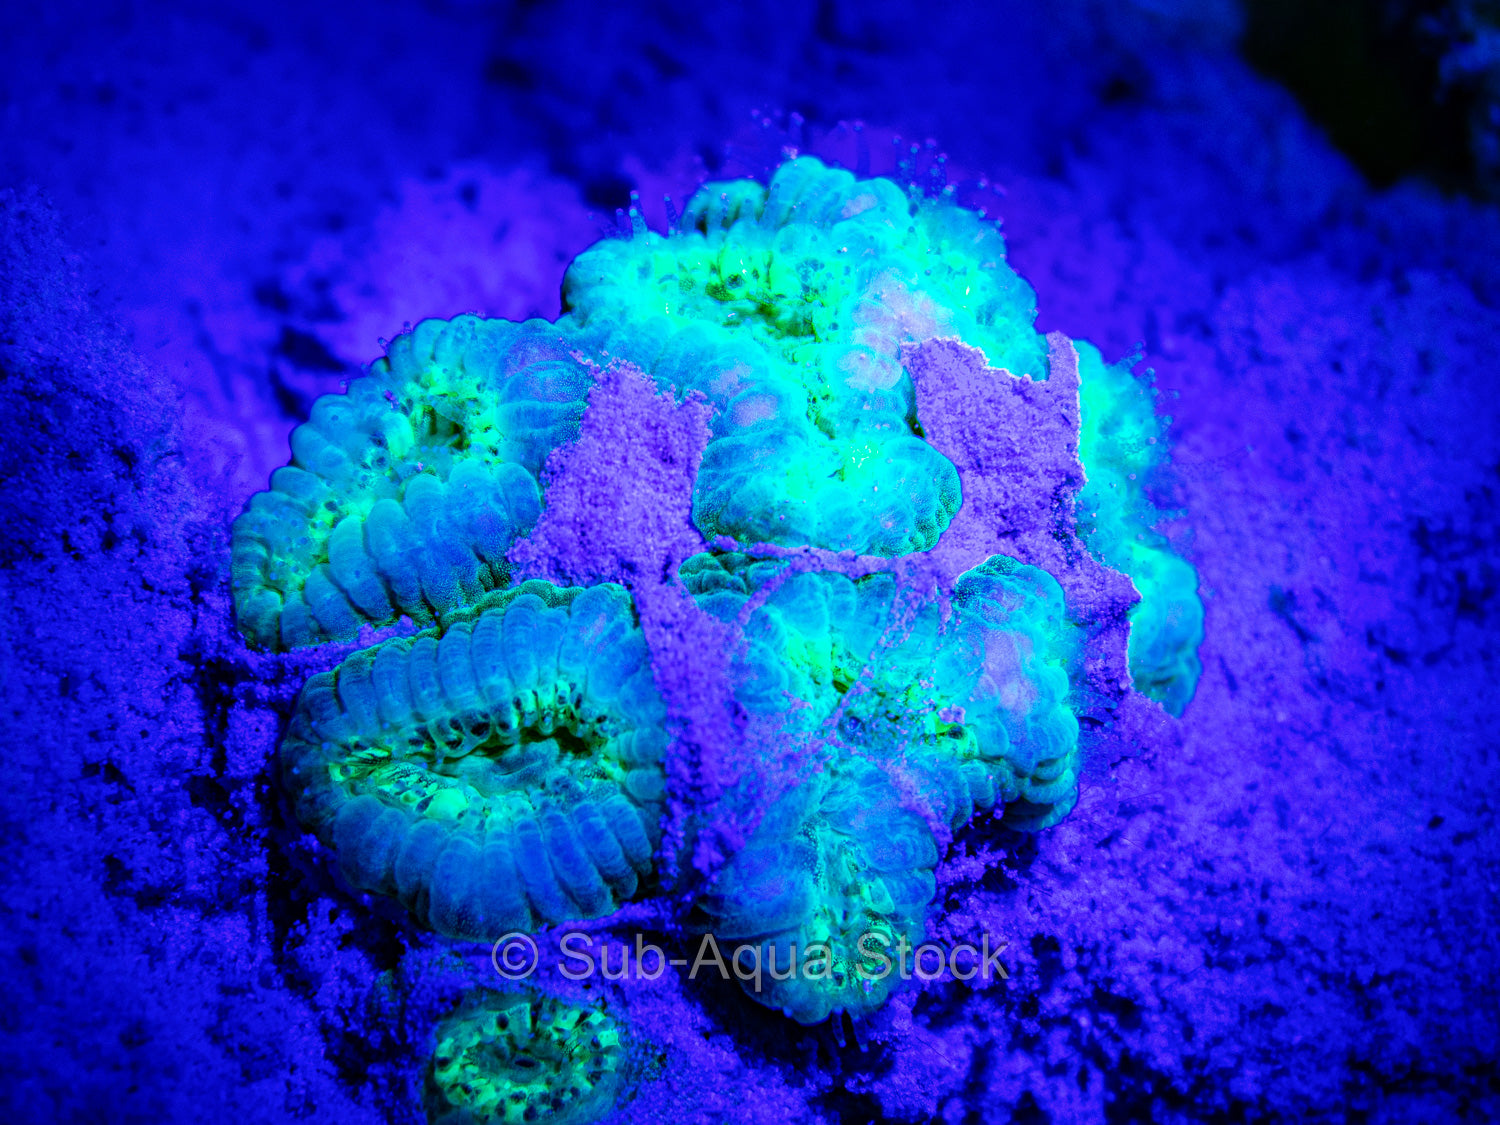 Bioluminescence exhibited by coral polyps at night.